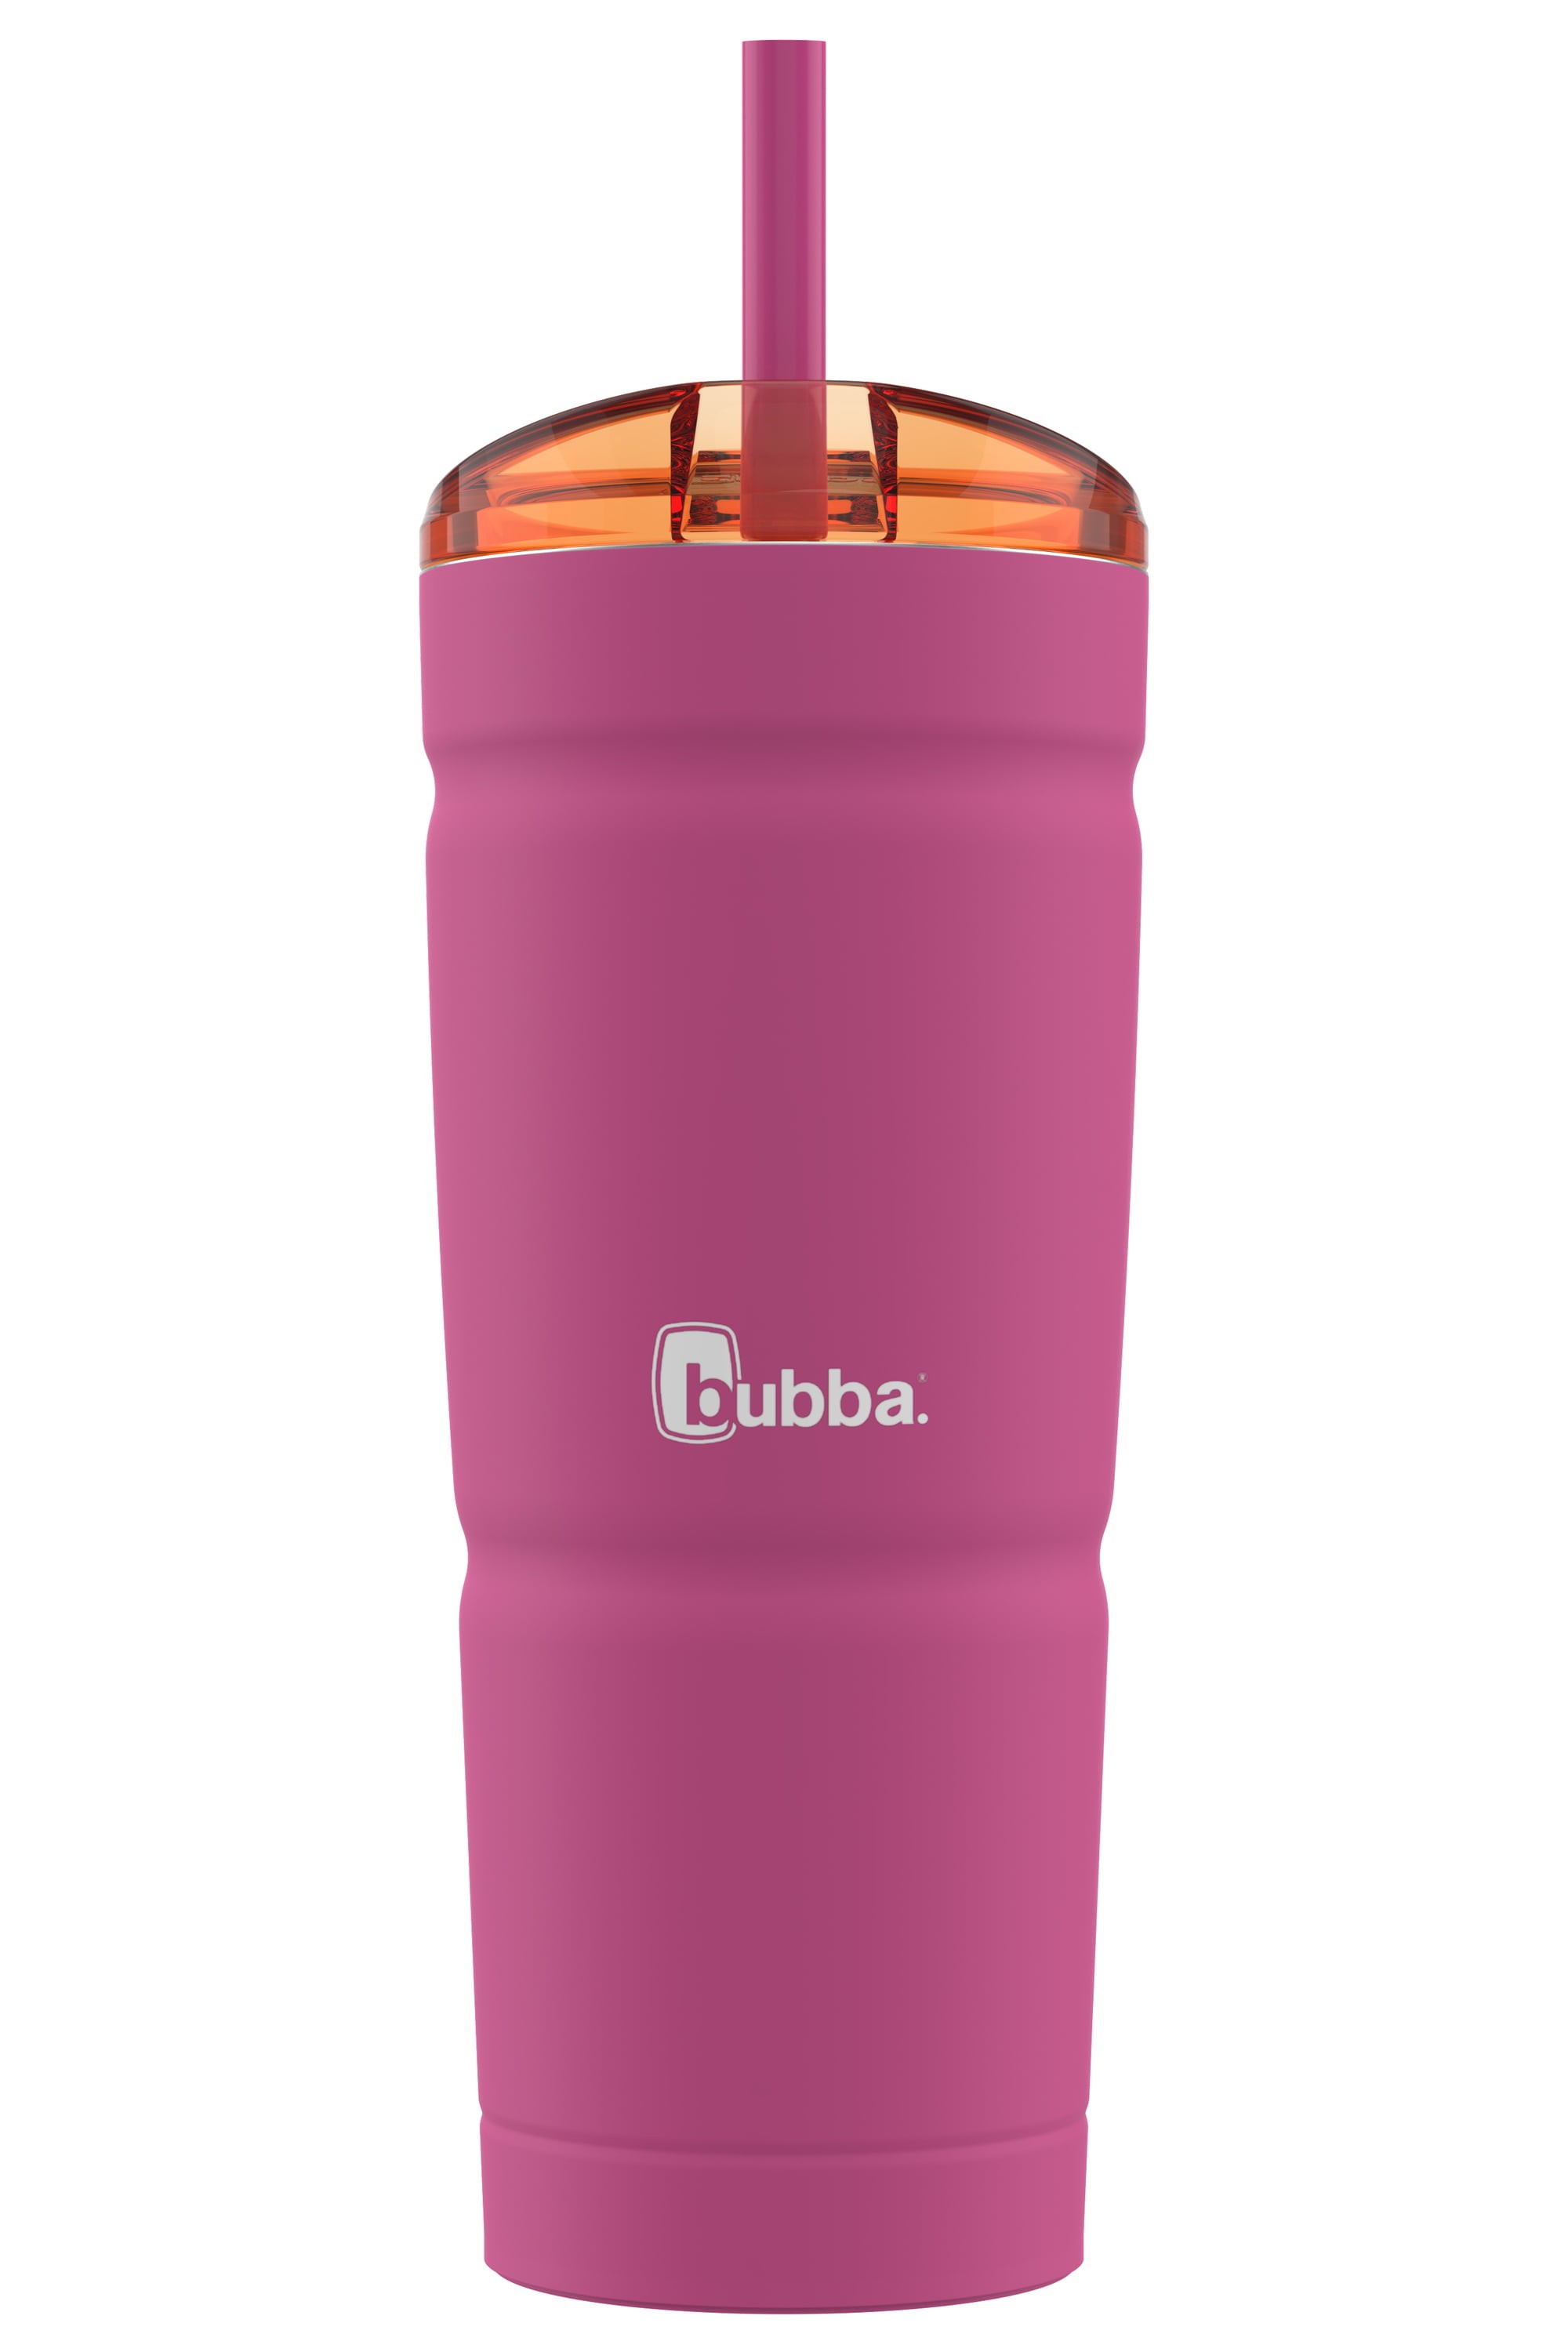 Bubba 24 oz Envy Insulated Stainless Steel Tumbler